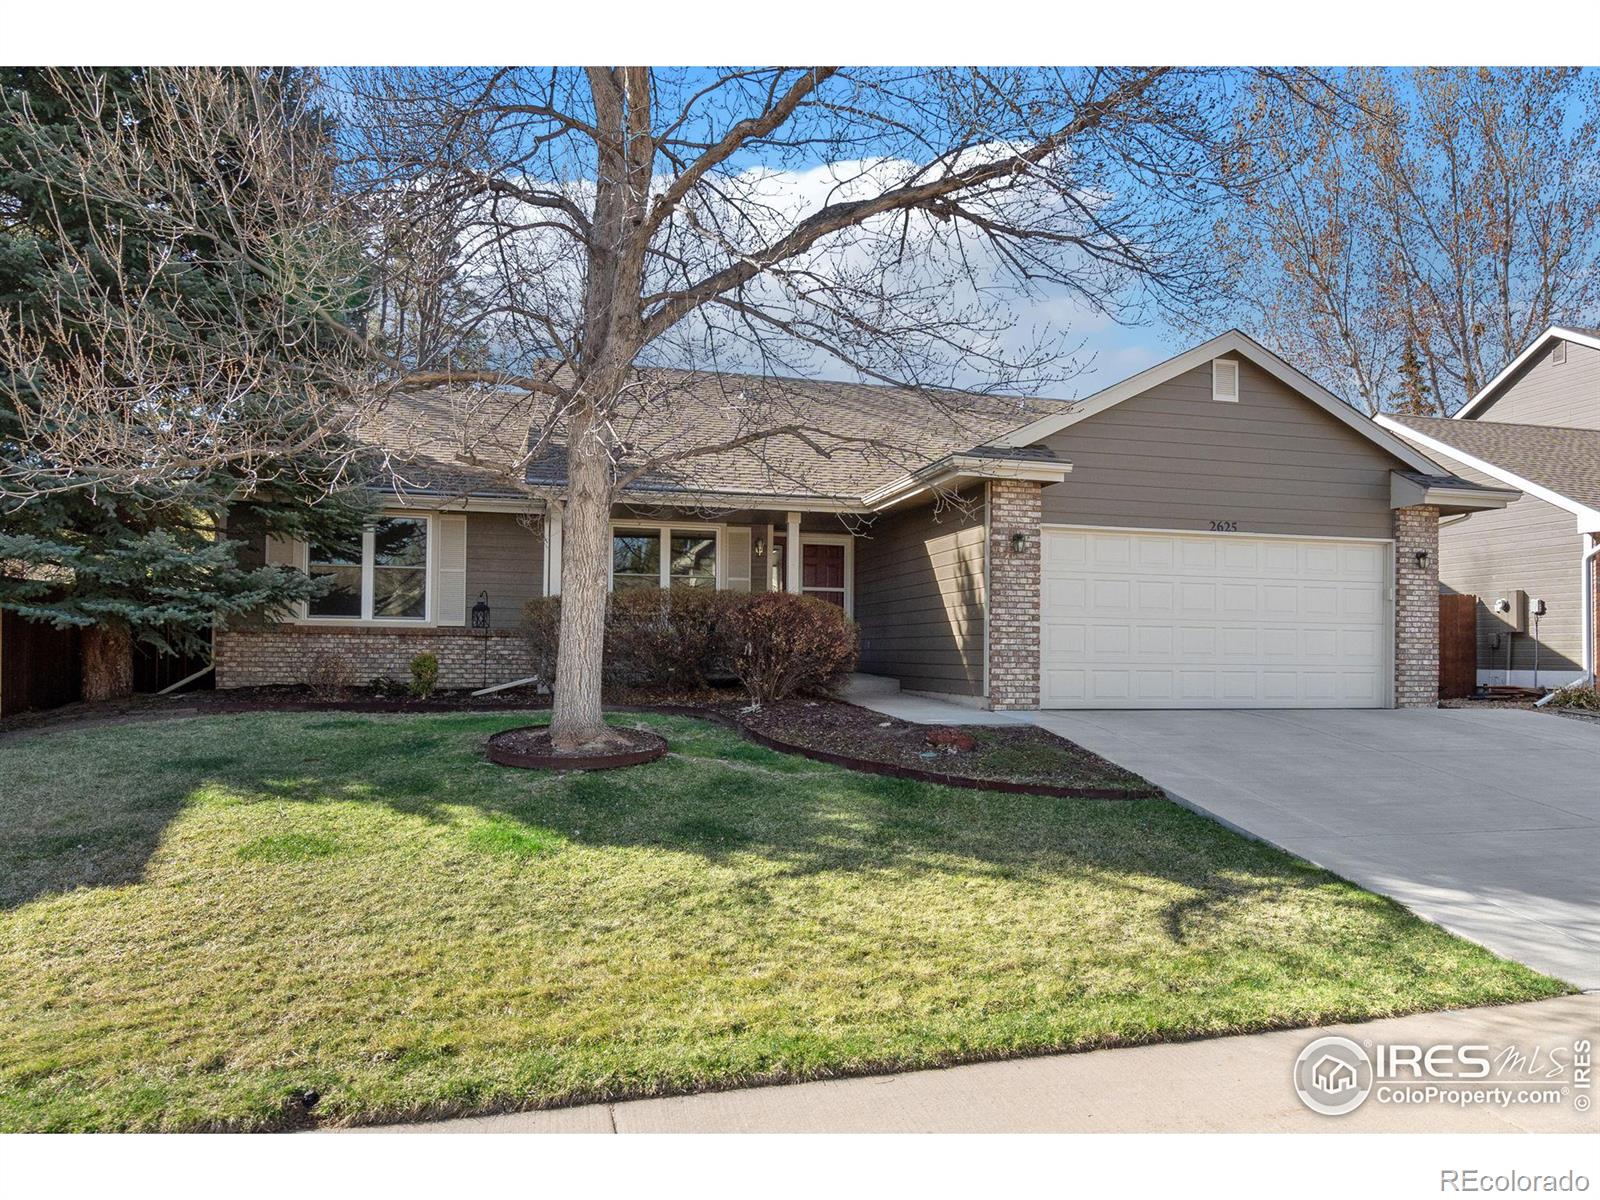 2625  Newgate Court, fort collins MLS: 4567891006726 Beds: 4 Baths: 4 Price: $650,000